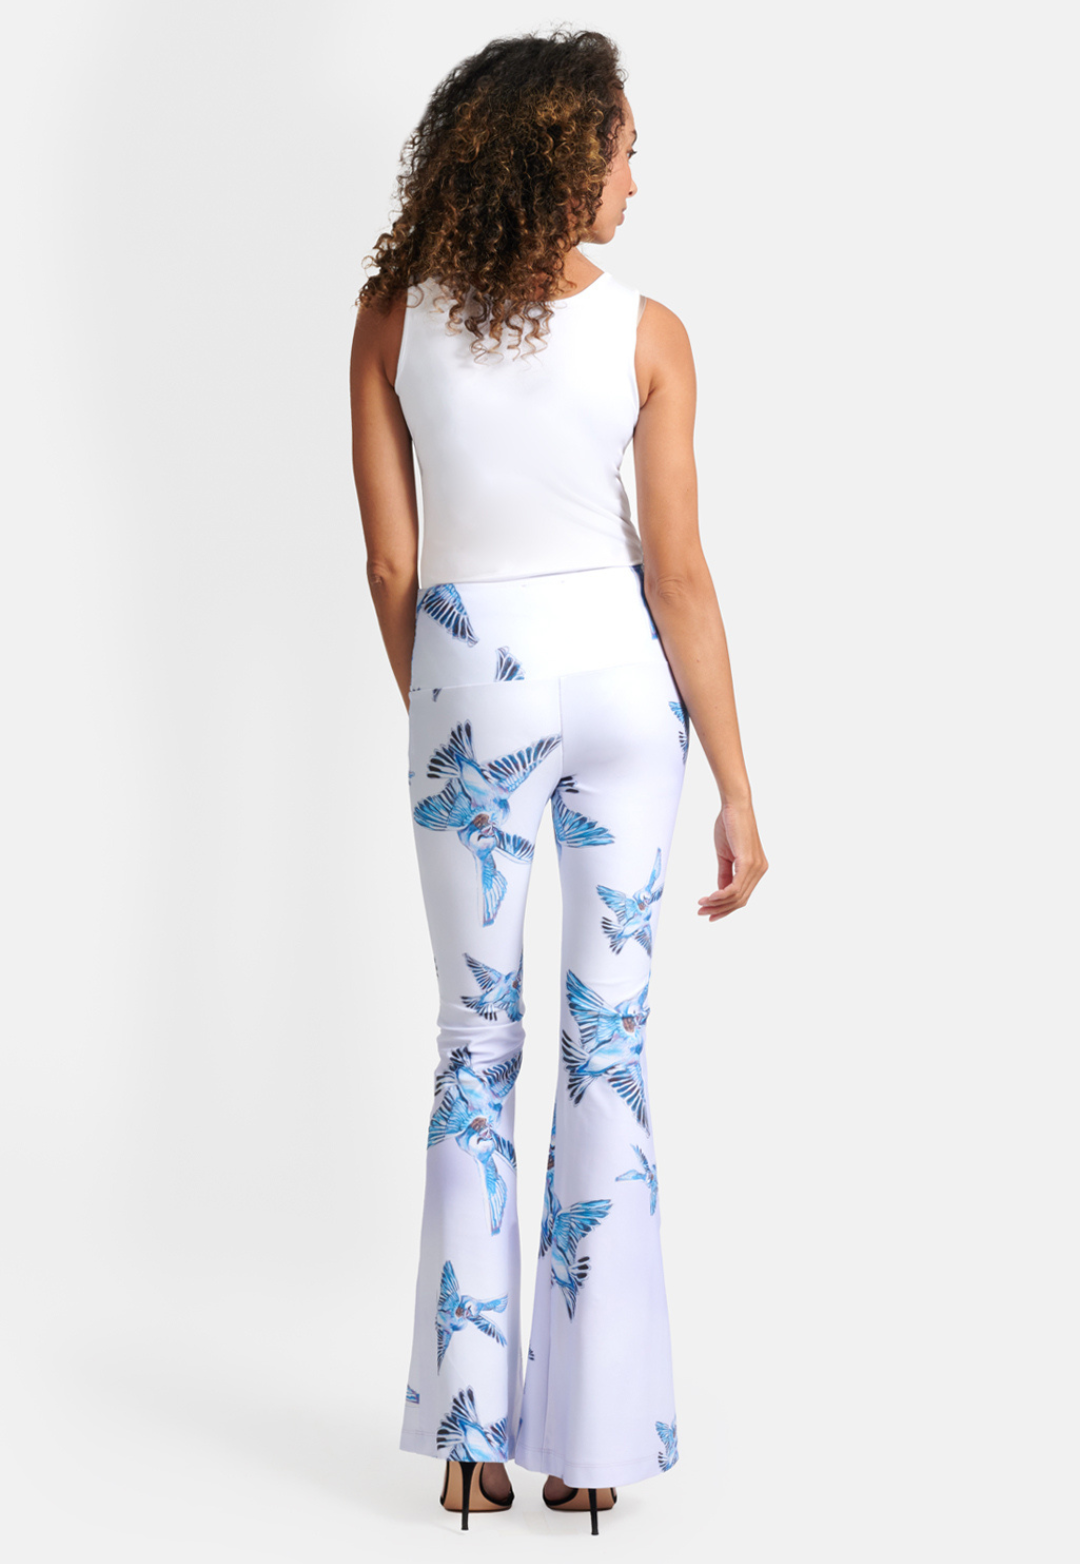 Woman wearing stretch knit lavender love birds printed pants with white stretch knit tank top by Ala von Auersperg